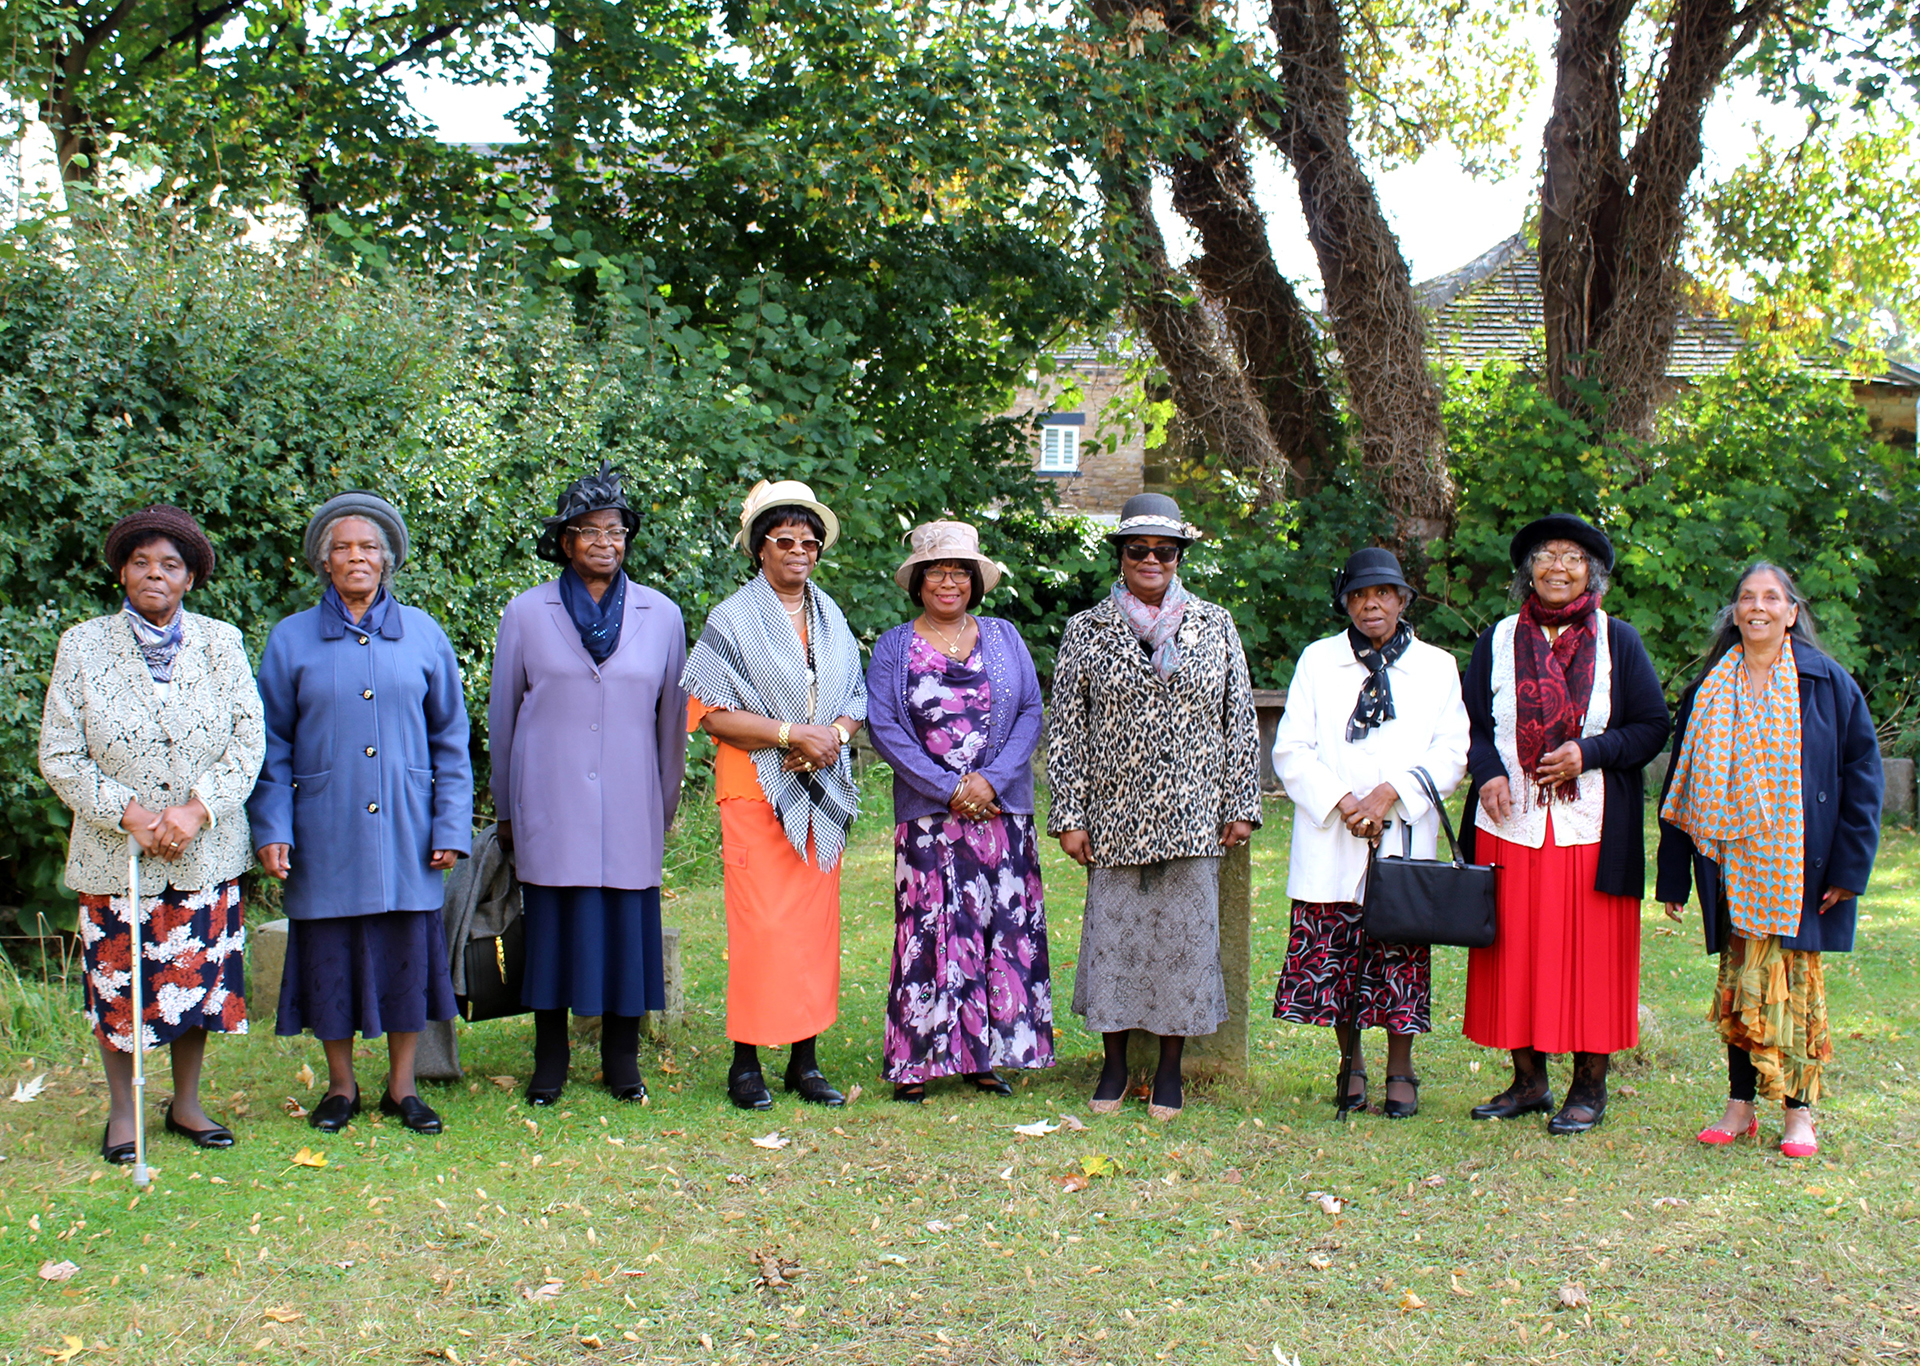 A photograph of the Black Ladies Group. There are eight people standing in a line, some are wearing hats. They are outside with trees behind them.